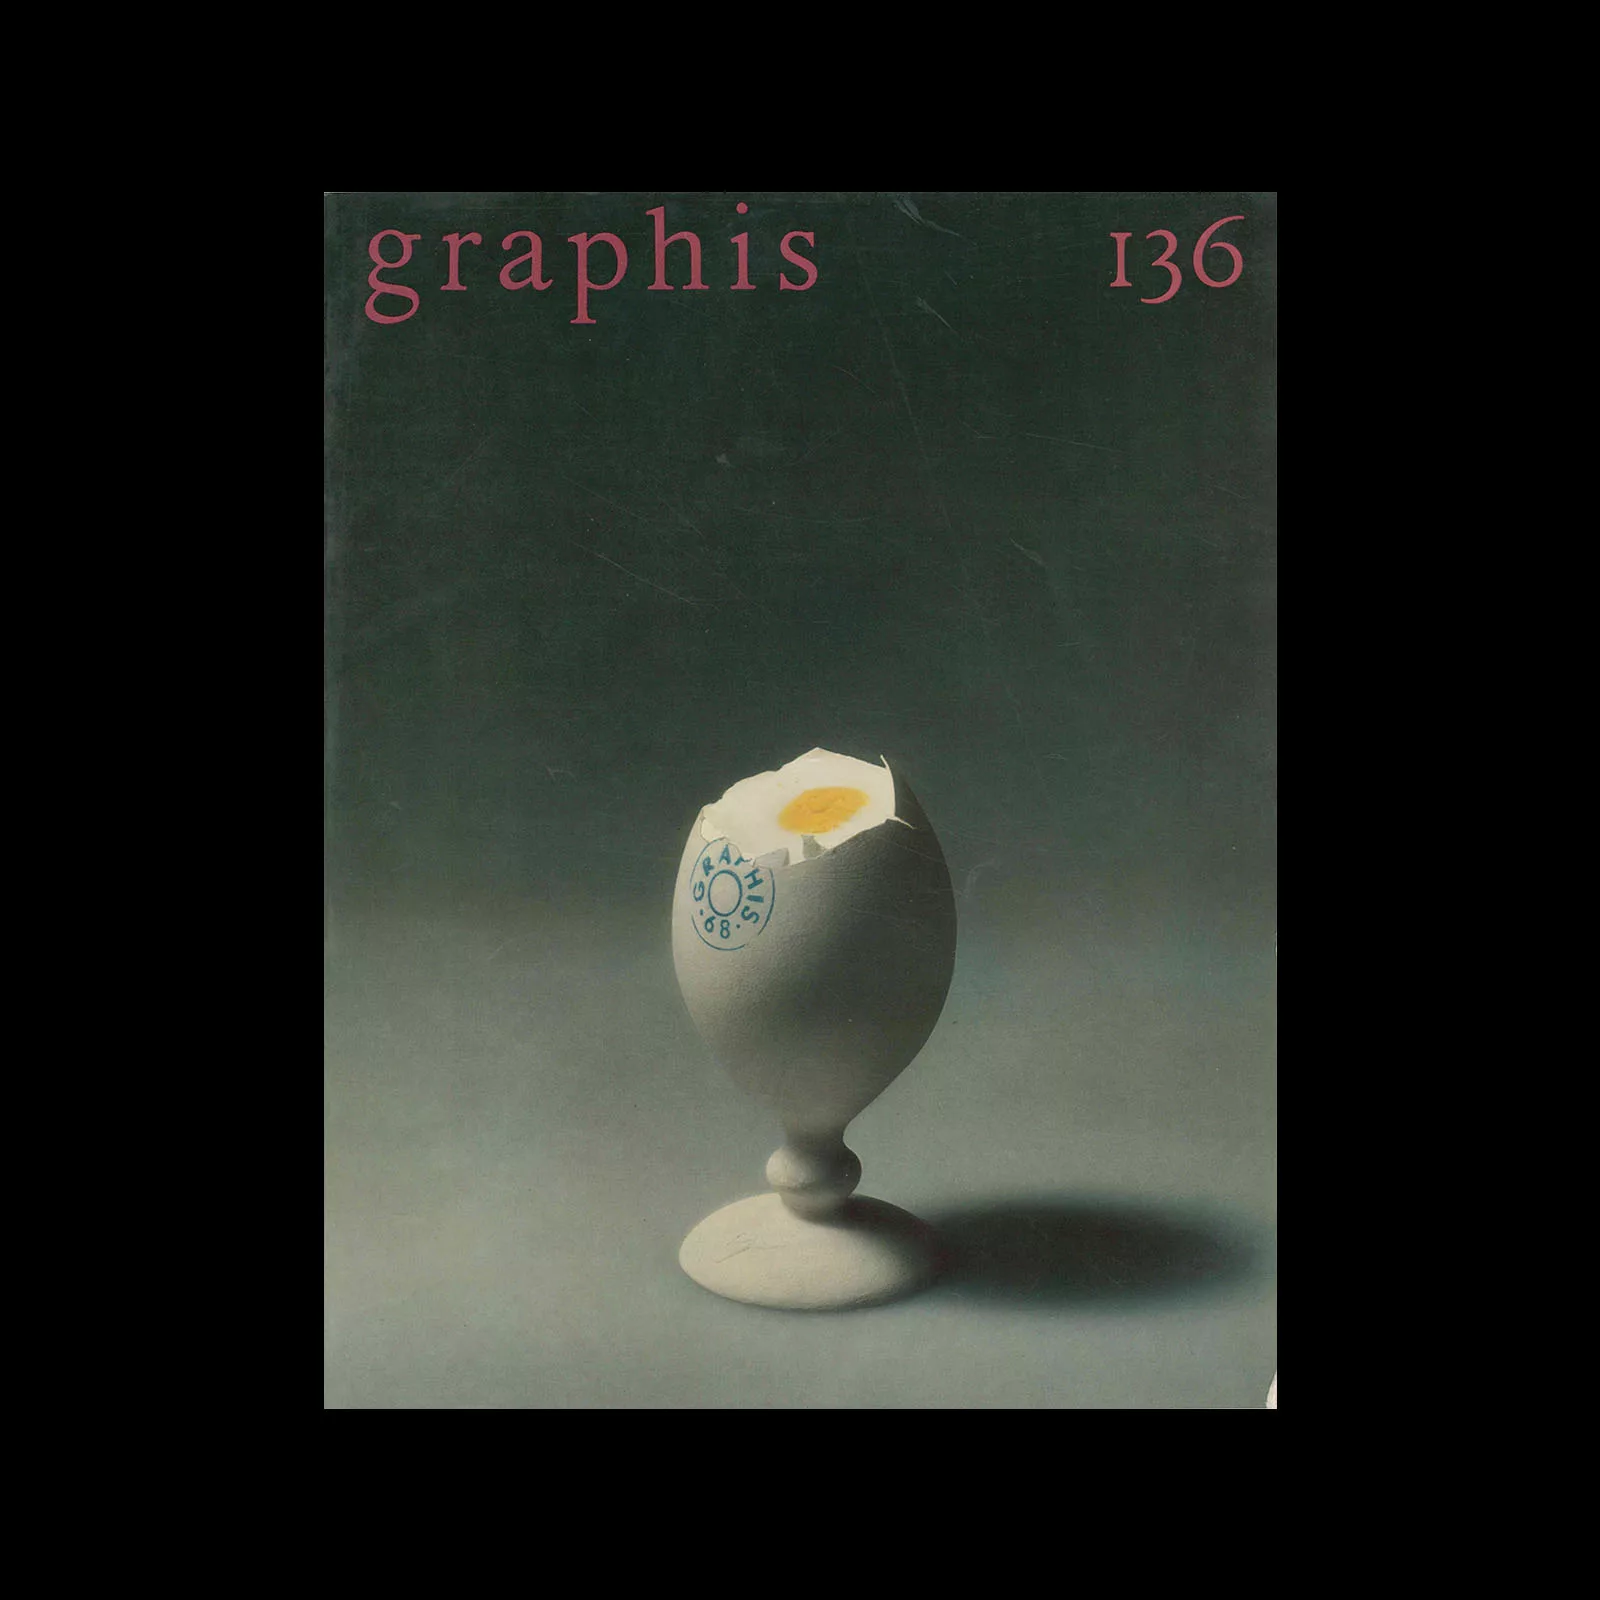 Graphis 136, 1968. Cover design by Graphicteam.